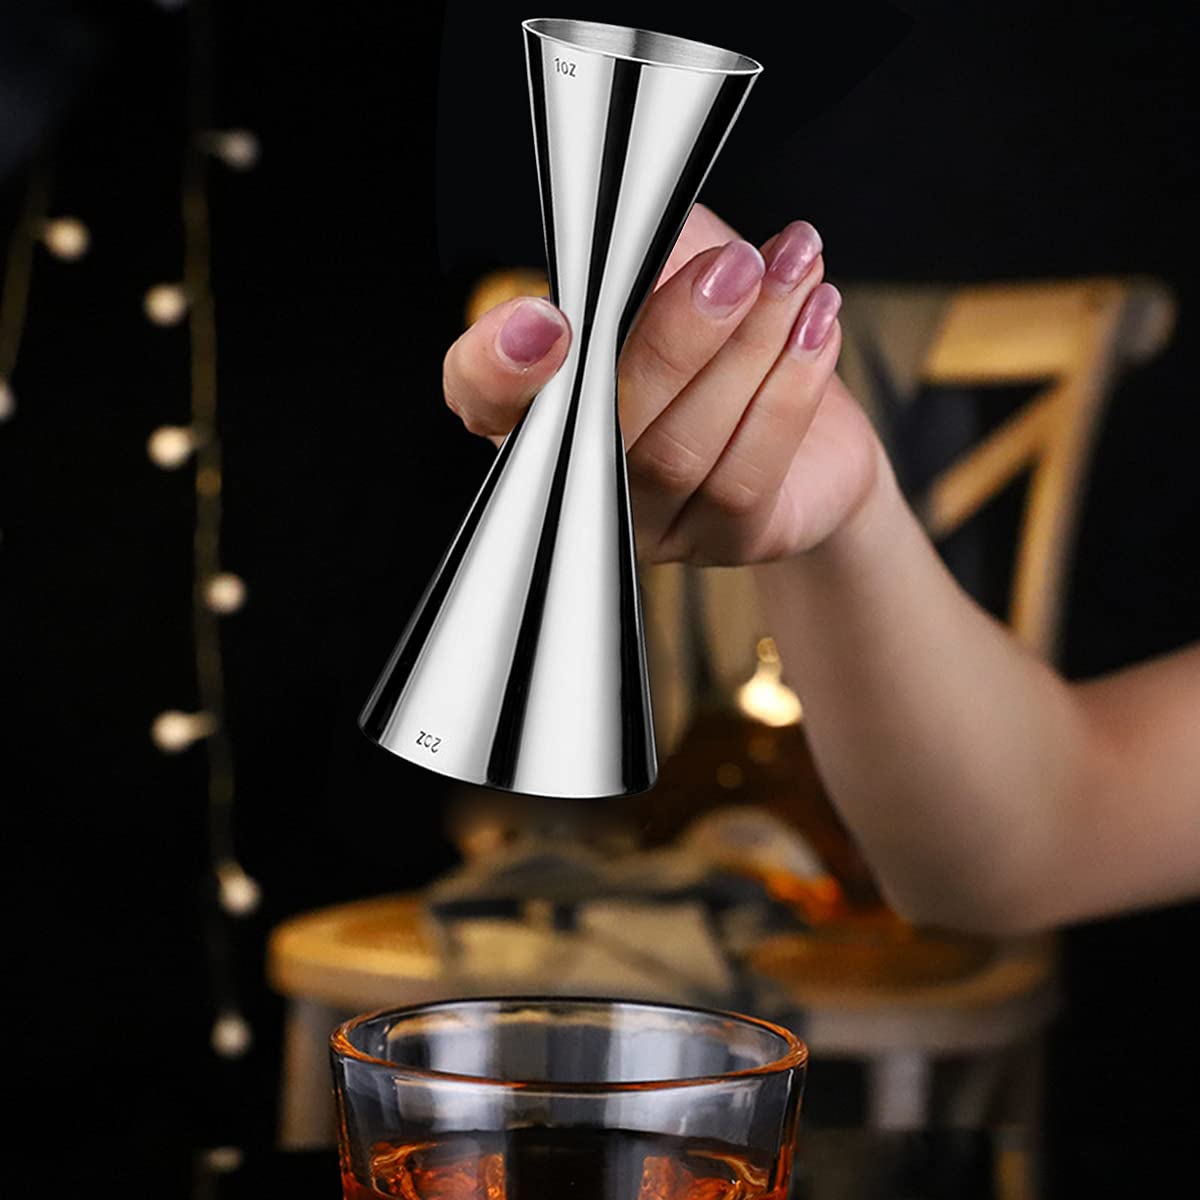 CA Mode Double Cocktail Jigger with Measurements Inside, 2 oz 1 oz Jigger for Bartending, 304 Stainless Steel Cocktail Bar Tools for Bar Home Bartender Party Wine Drink